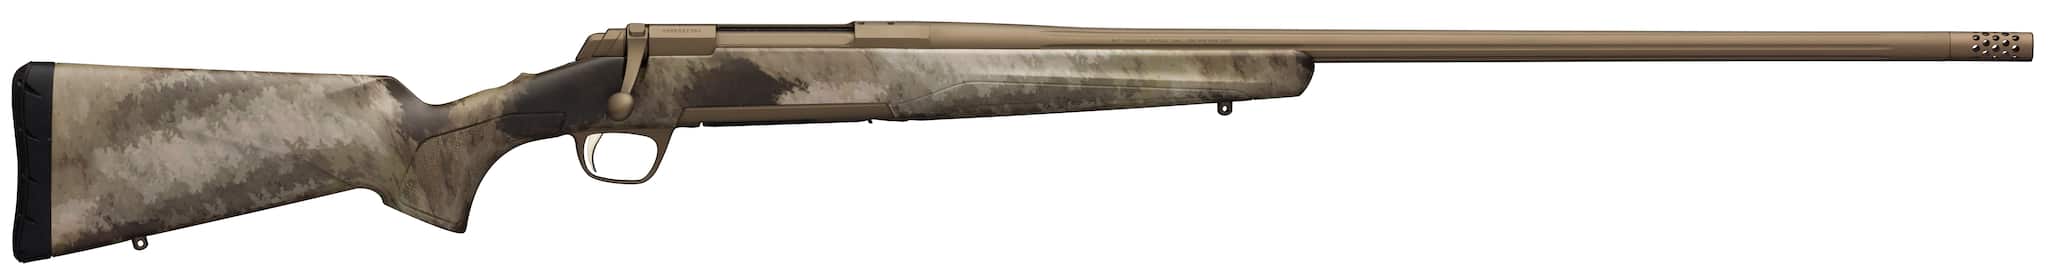 Image of BROWNING X-BOLT HELL'S CANYON LONG RANGE